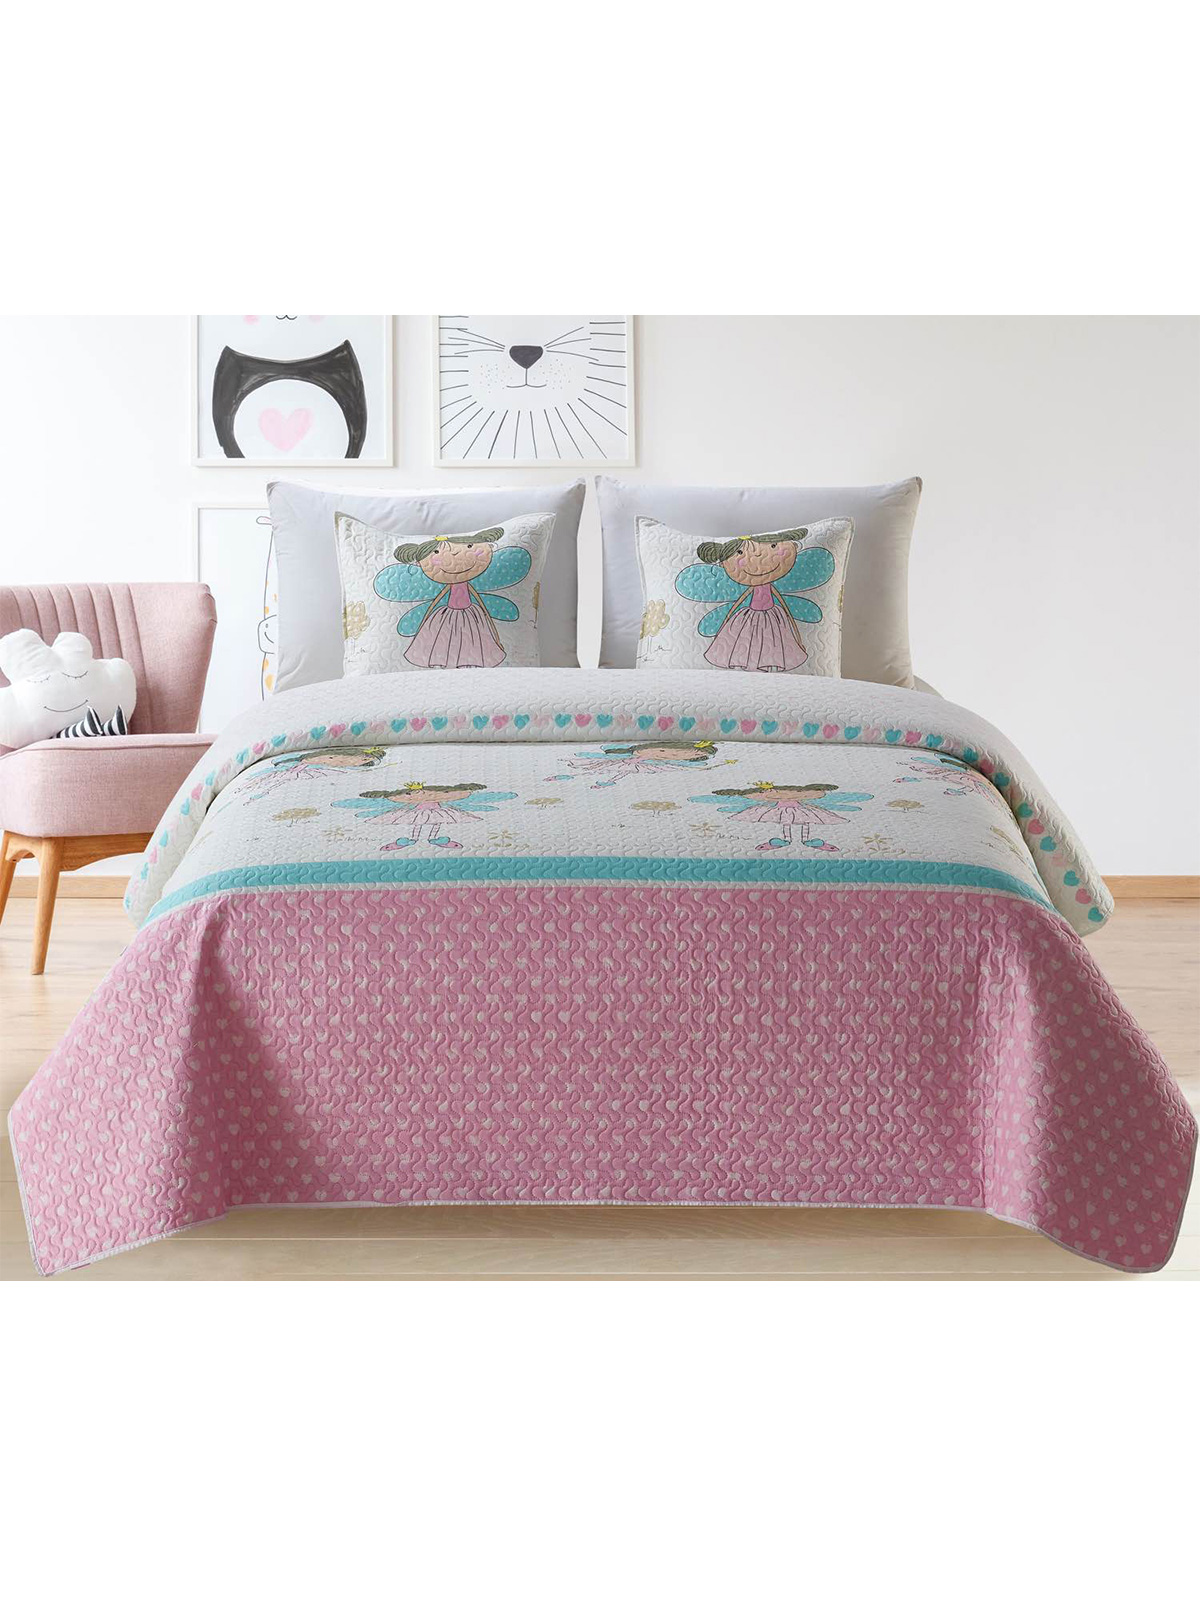 Edoti Children's Quilted Bedspread Princess A539